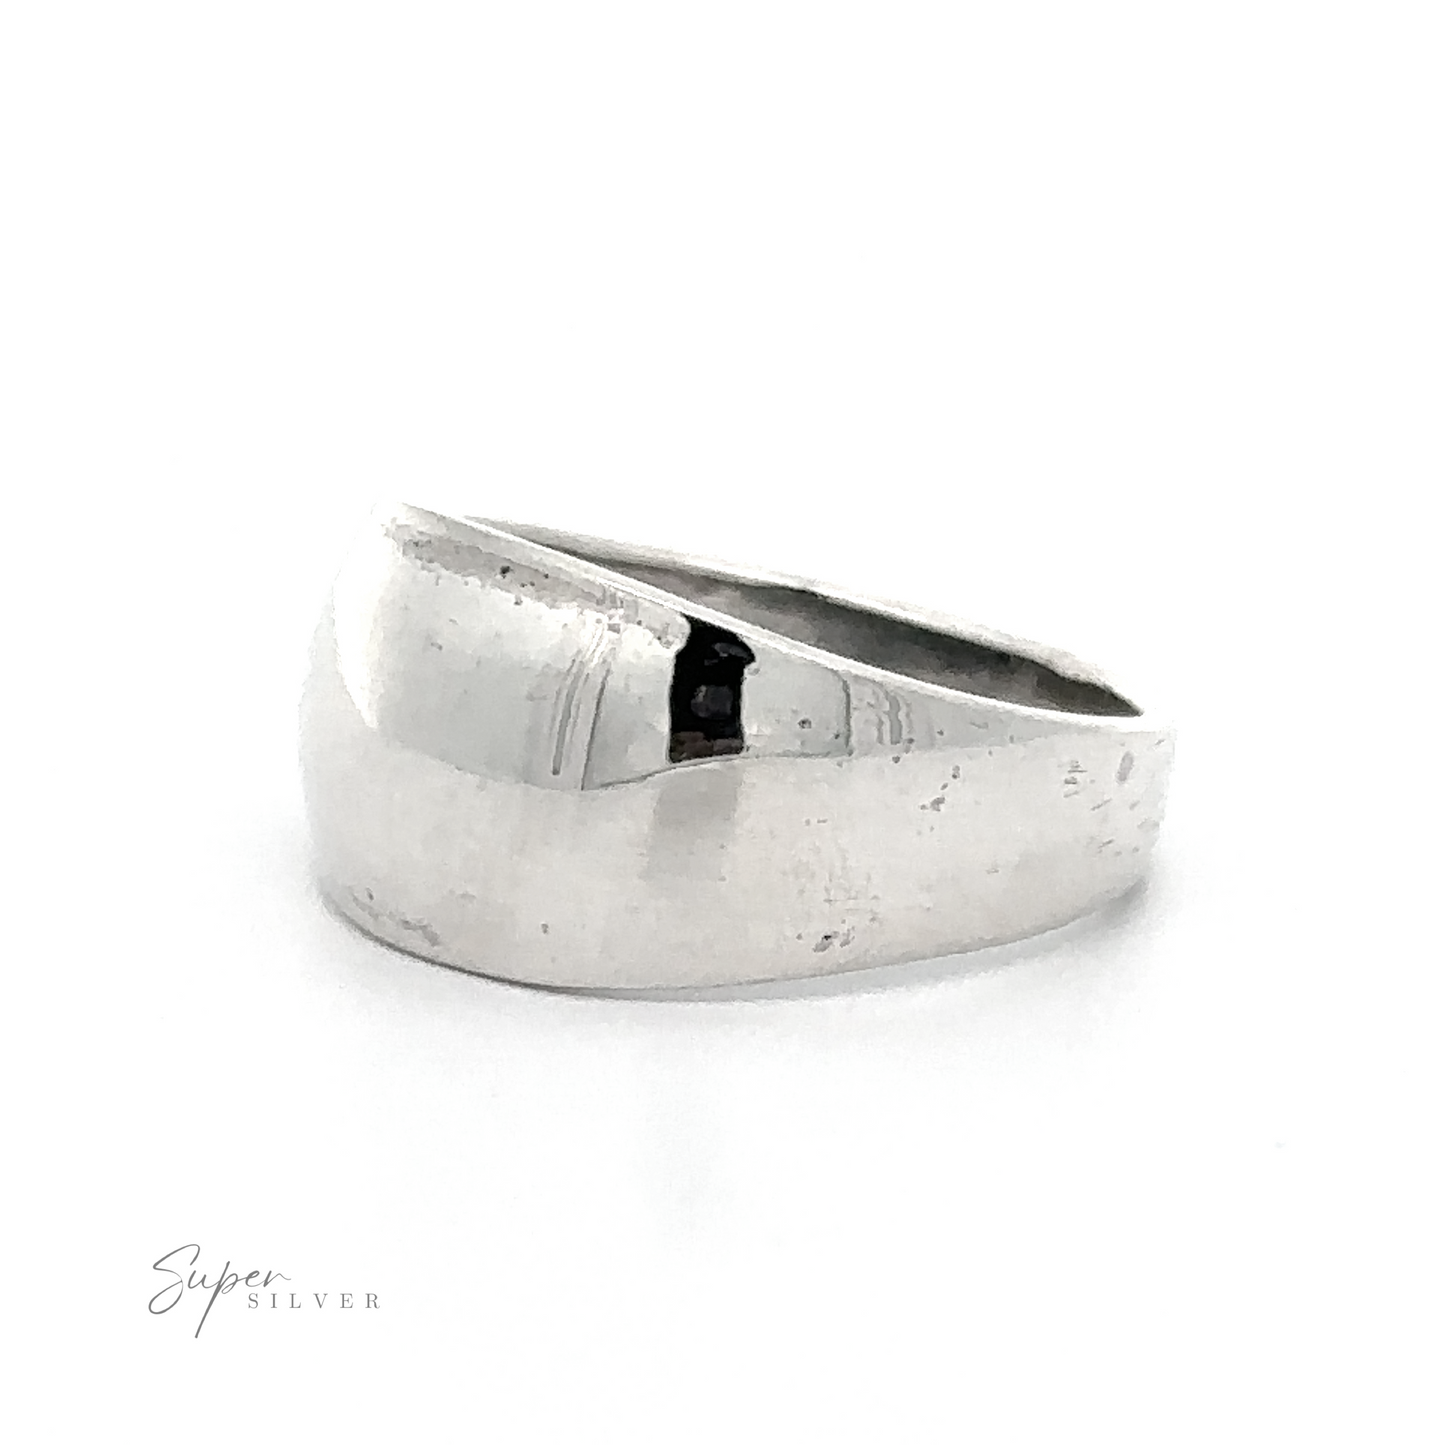 A contemporary Silver Dome Ring with a minimalist design on a white background.